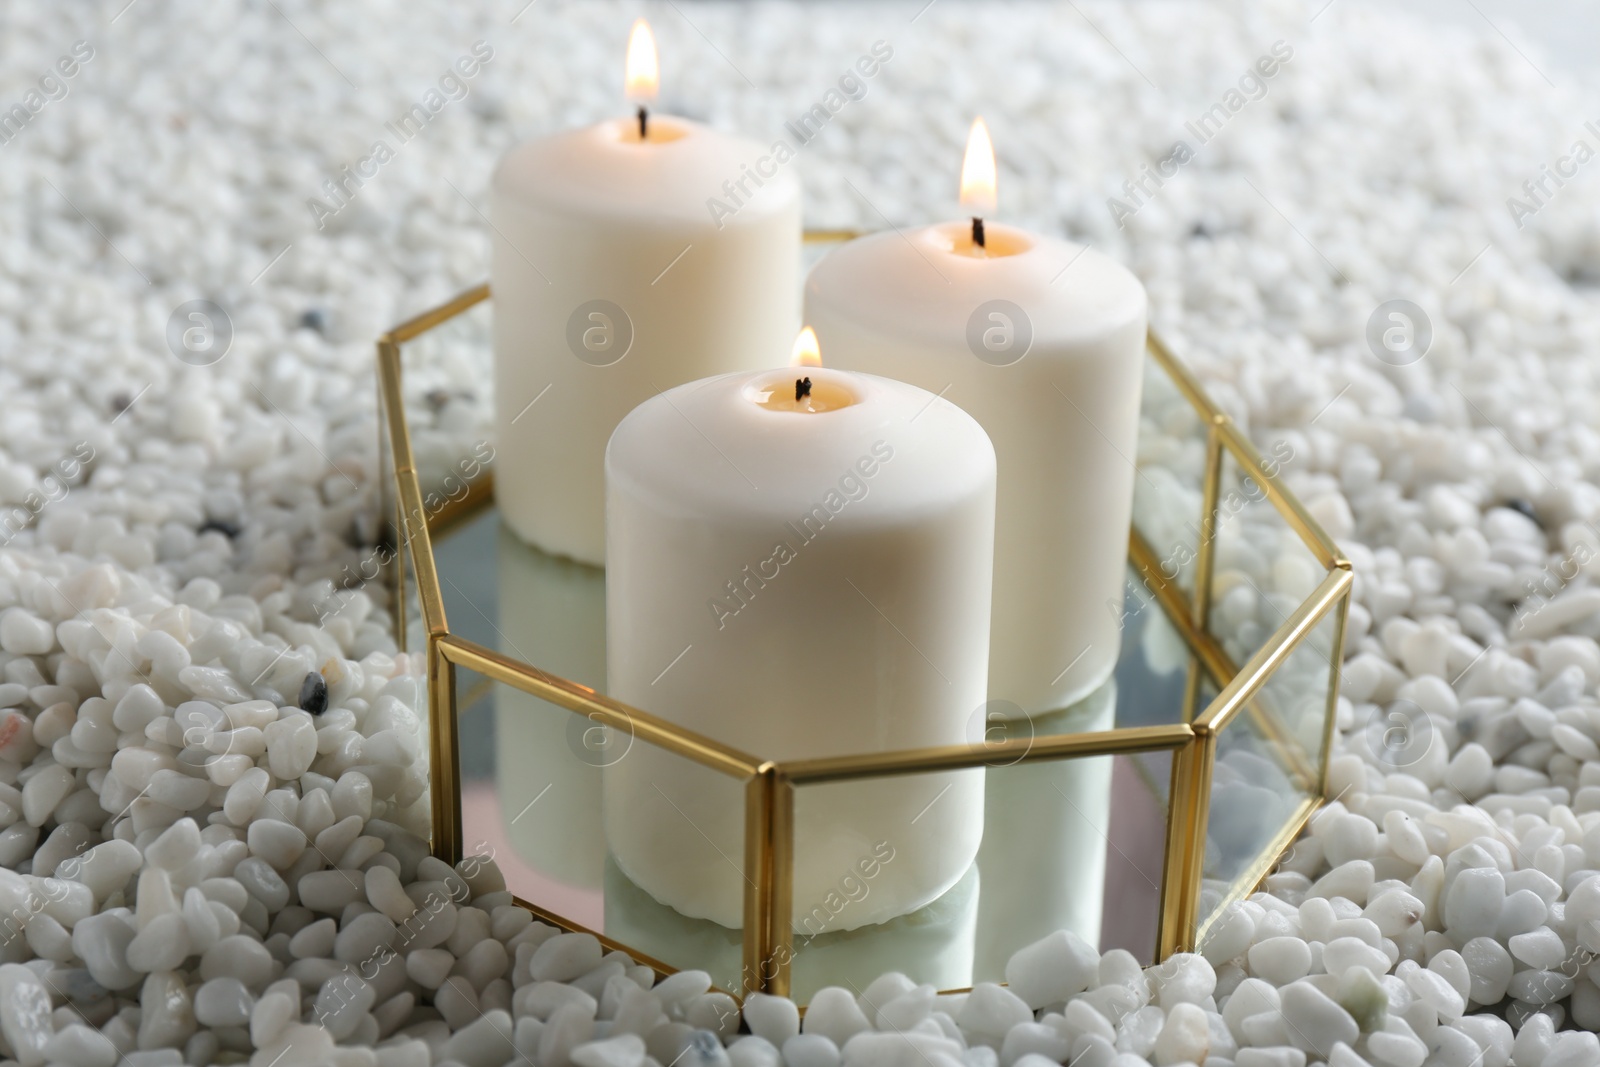 Photo of Tray with three white burning candles on rocks